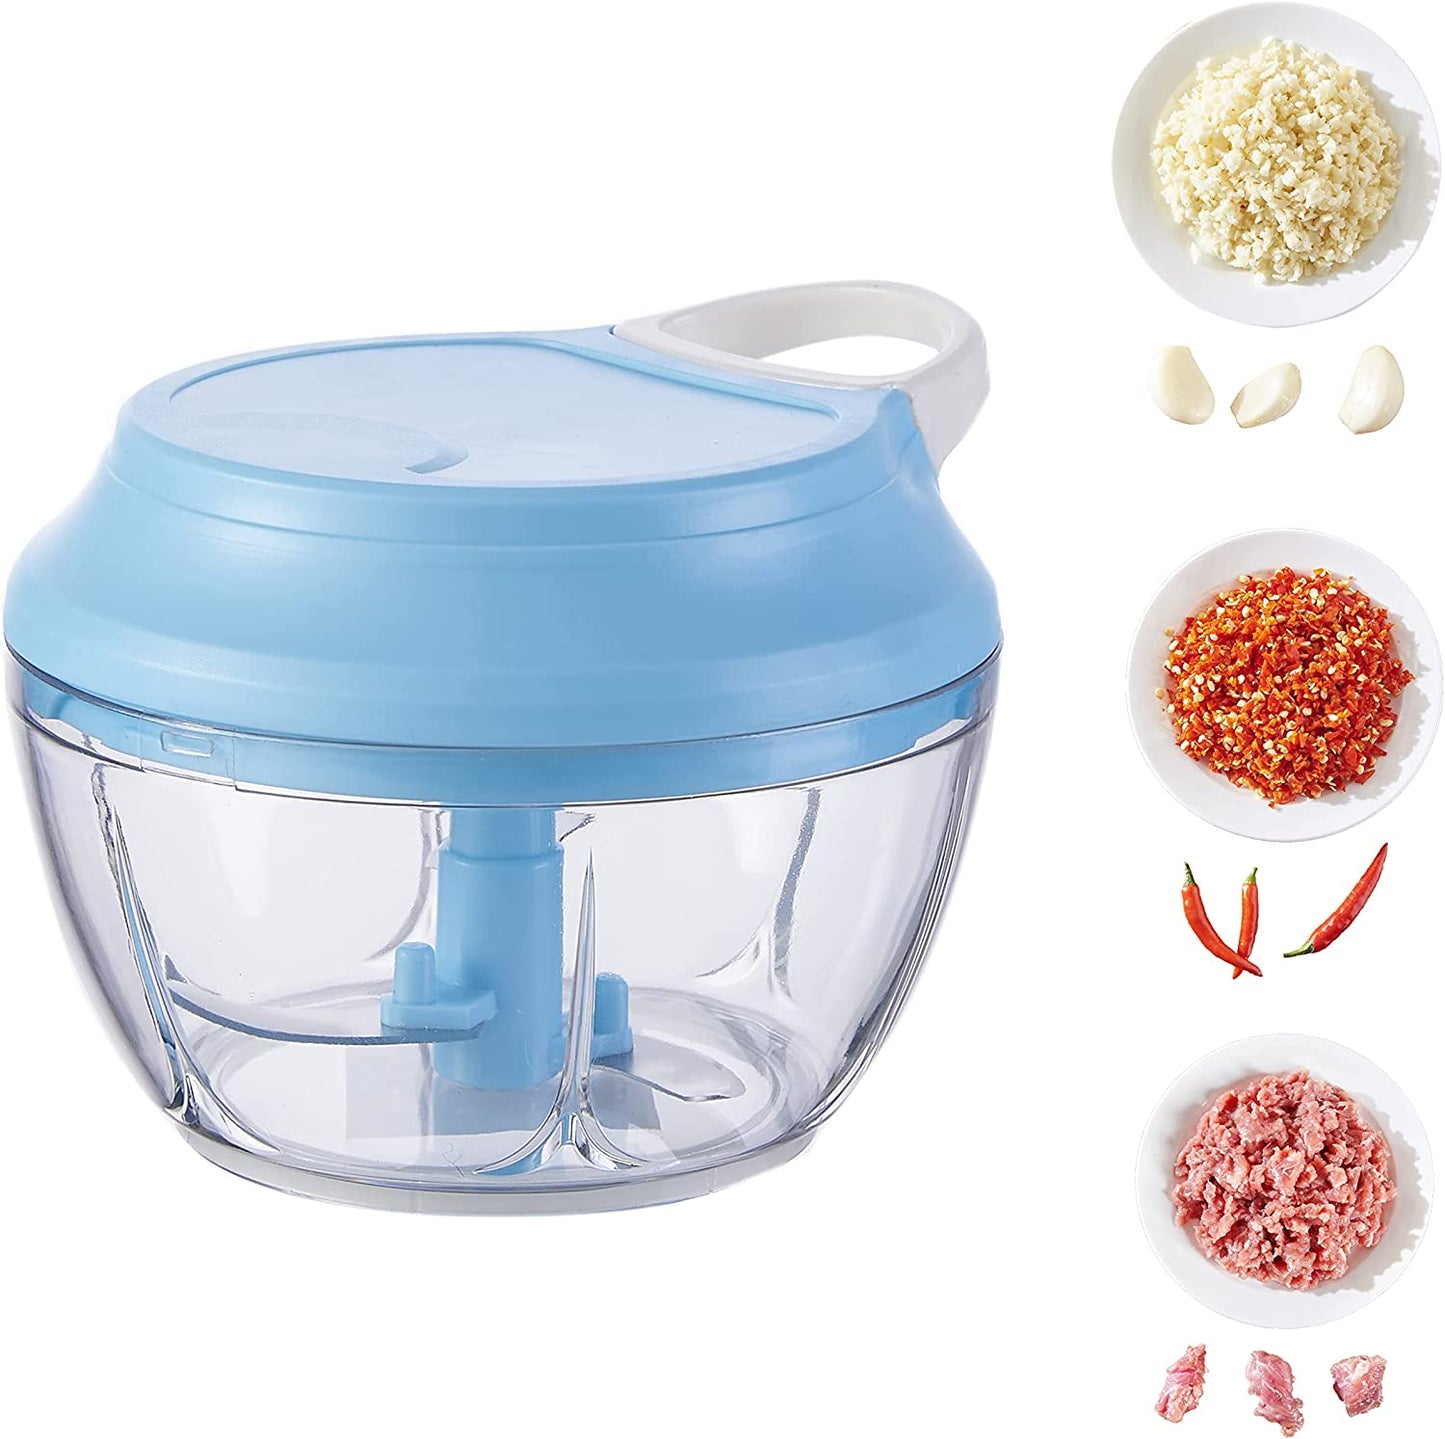 Manual Food Chopper,Hand Pull Food Processor,Small Kitchen Speed Mincer,Vegetable Chopper,Portable Chopper for Garlic, Onion, Ginger (Blue)